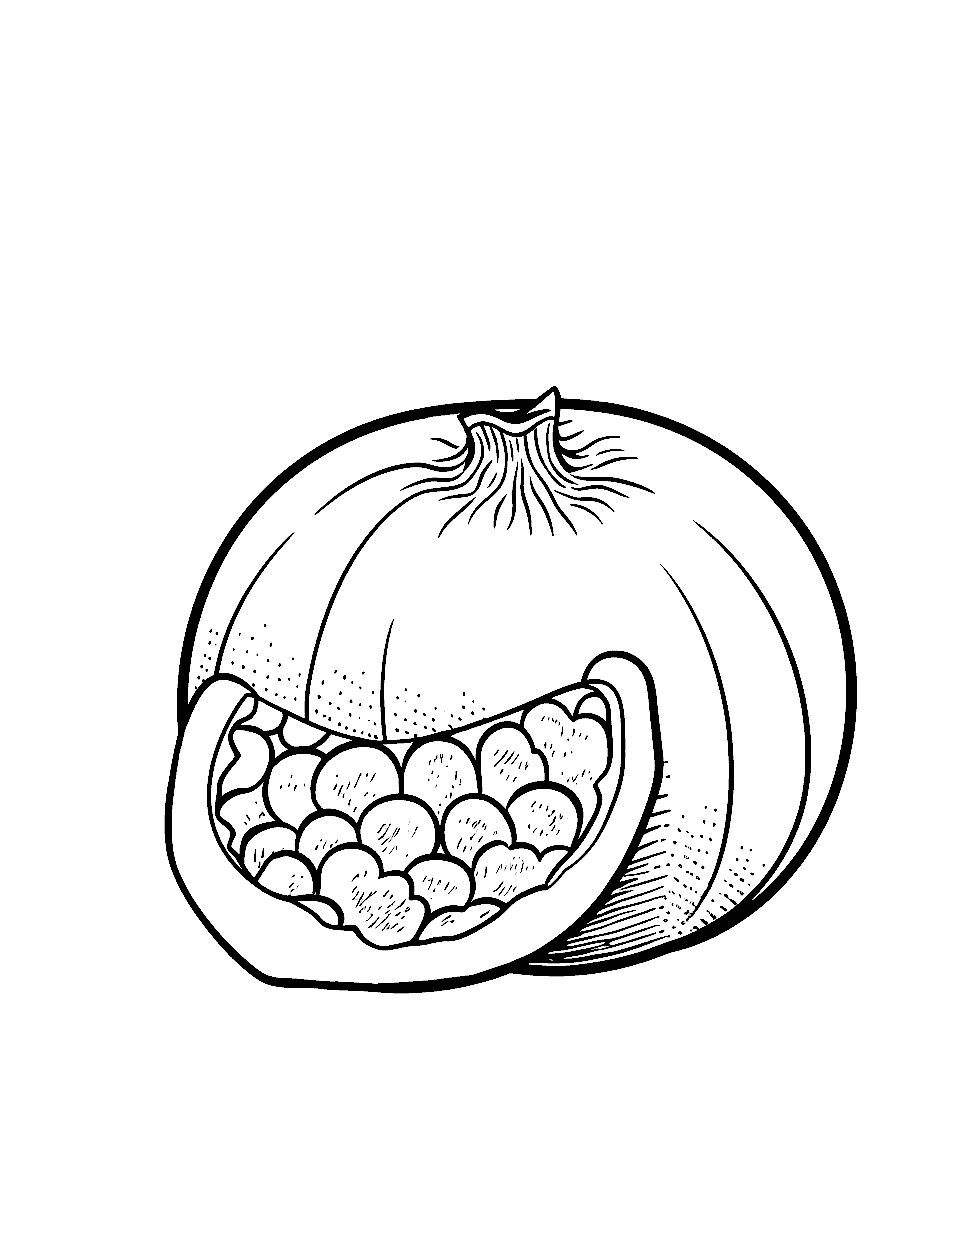 Pomegranate Puzzle Fruit Coloring Page - A slice of pomegranate, showing its intricate seed pattern.